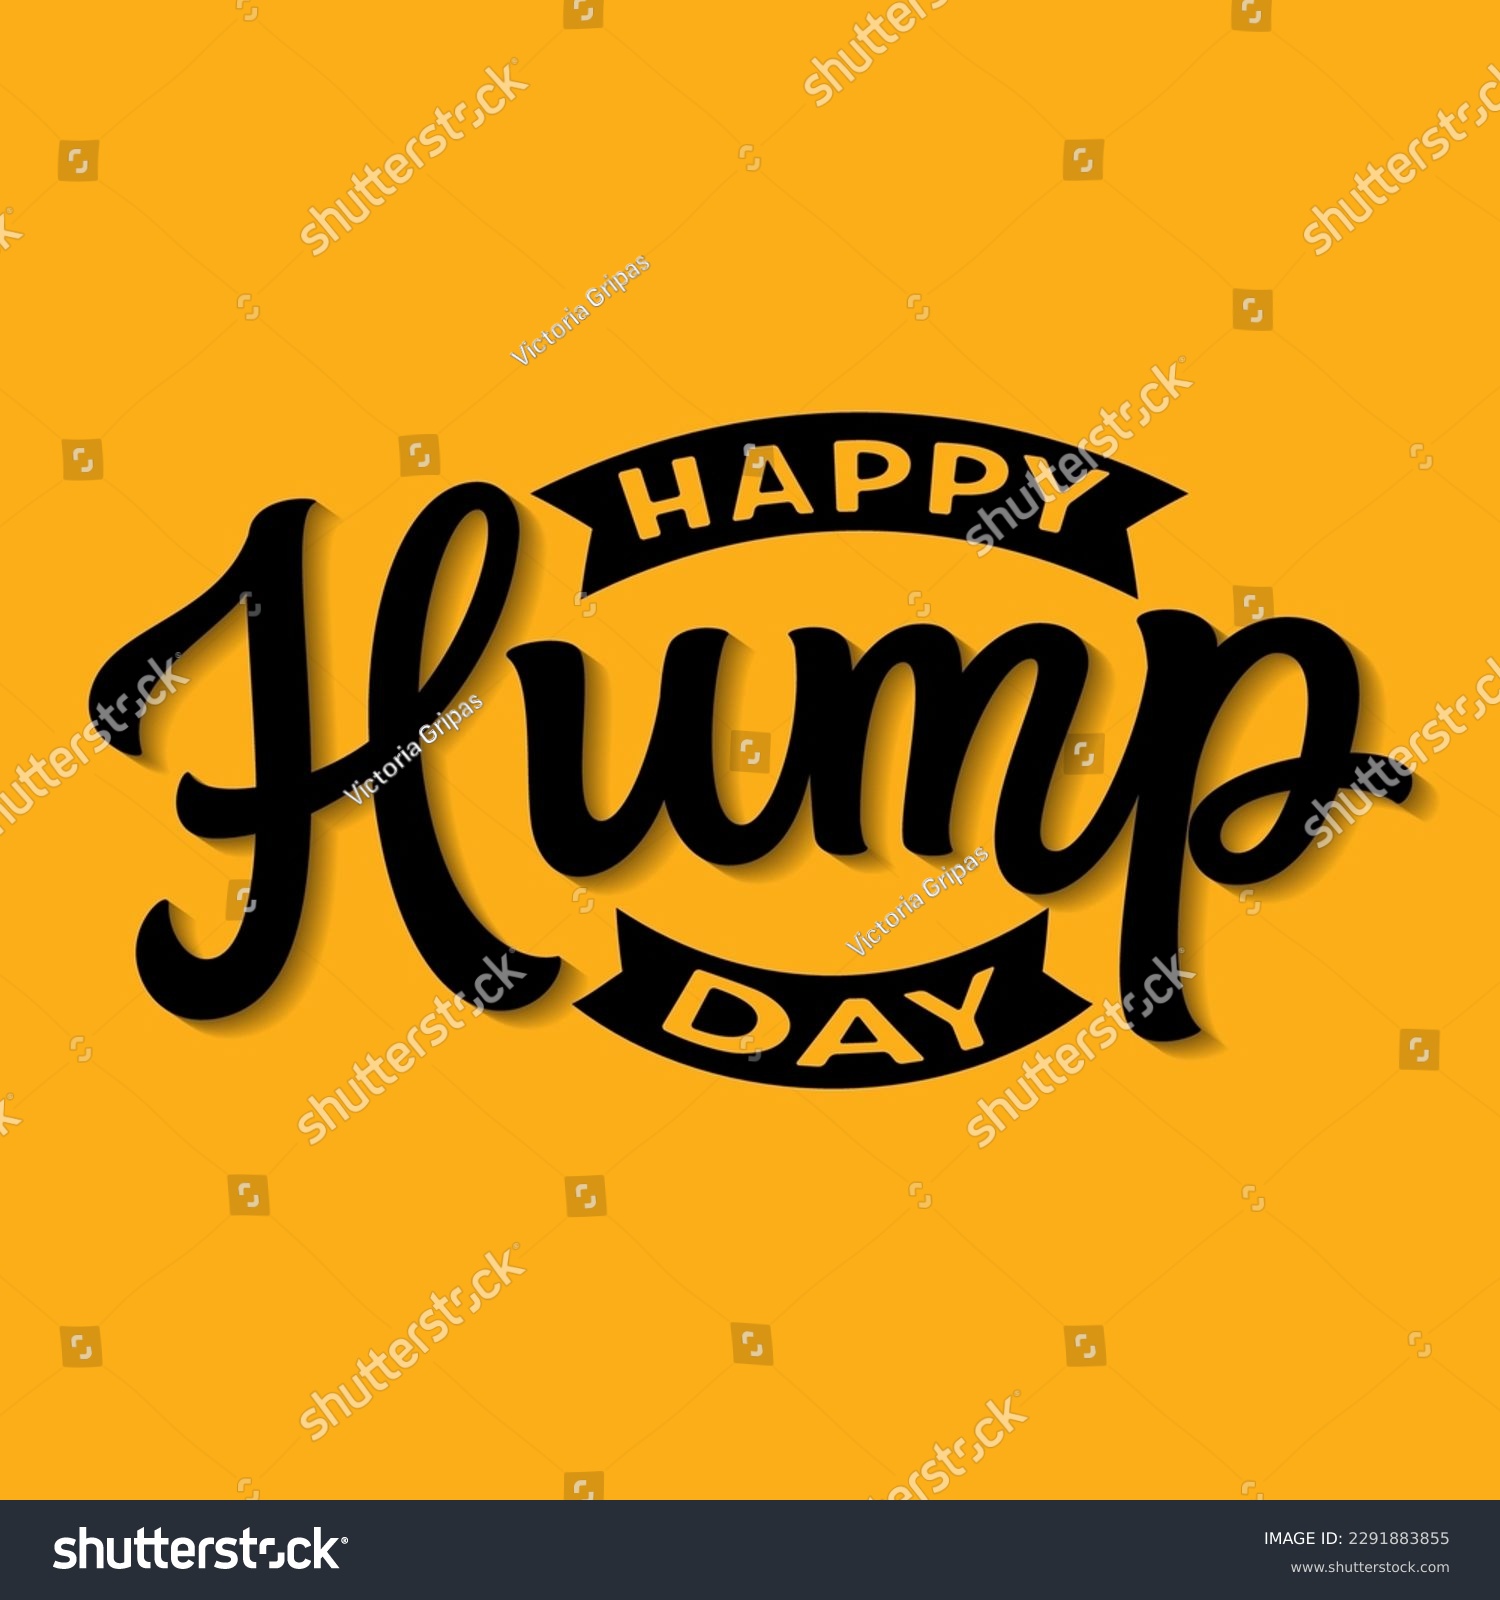 chris dlugosz recommends Happy Humpday Images